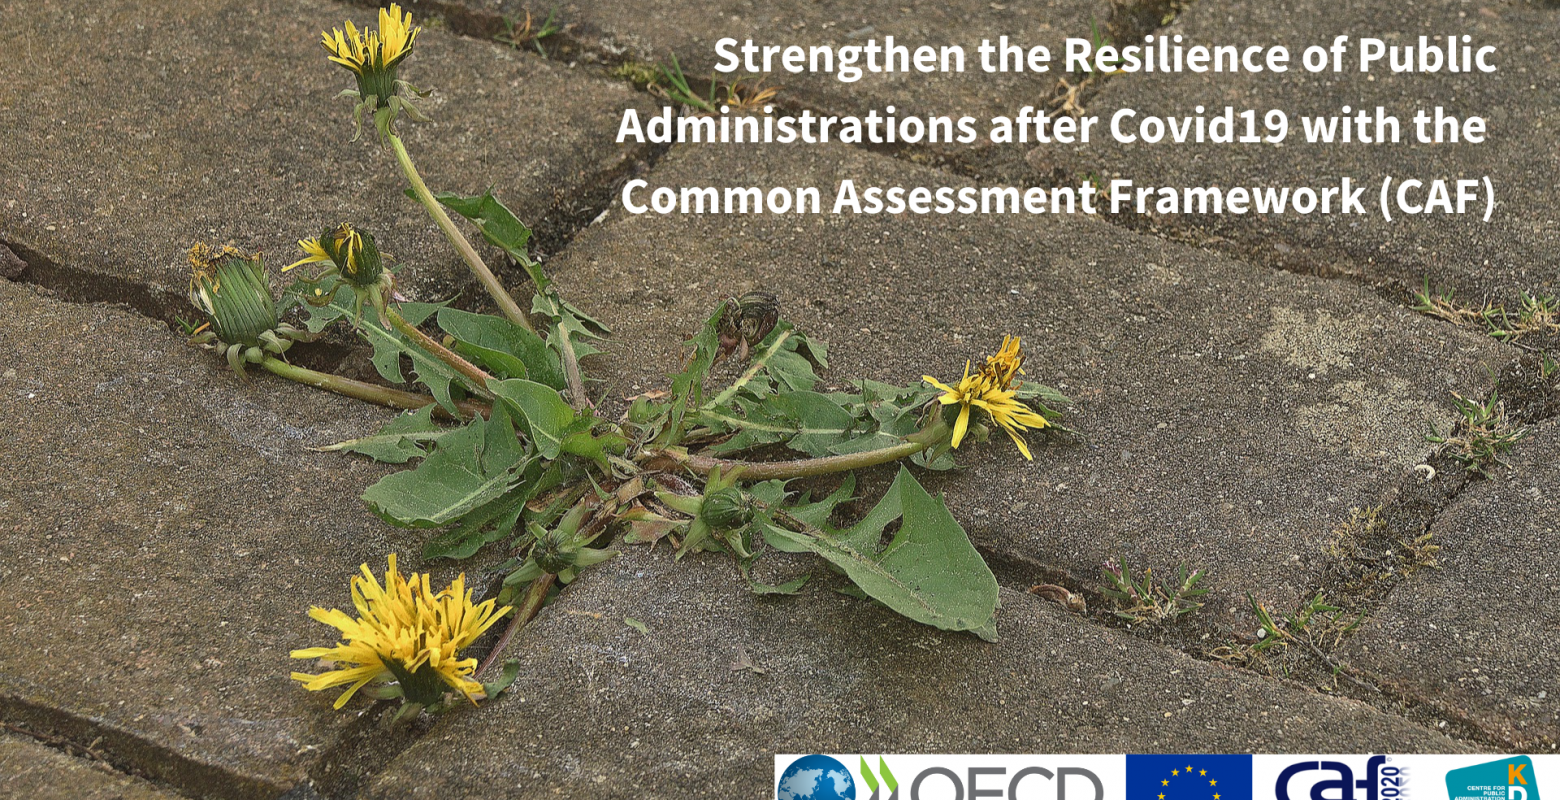 Strenghten the Resilience of Public Administrations after Covid19 with CAF